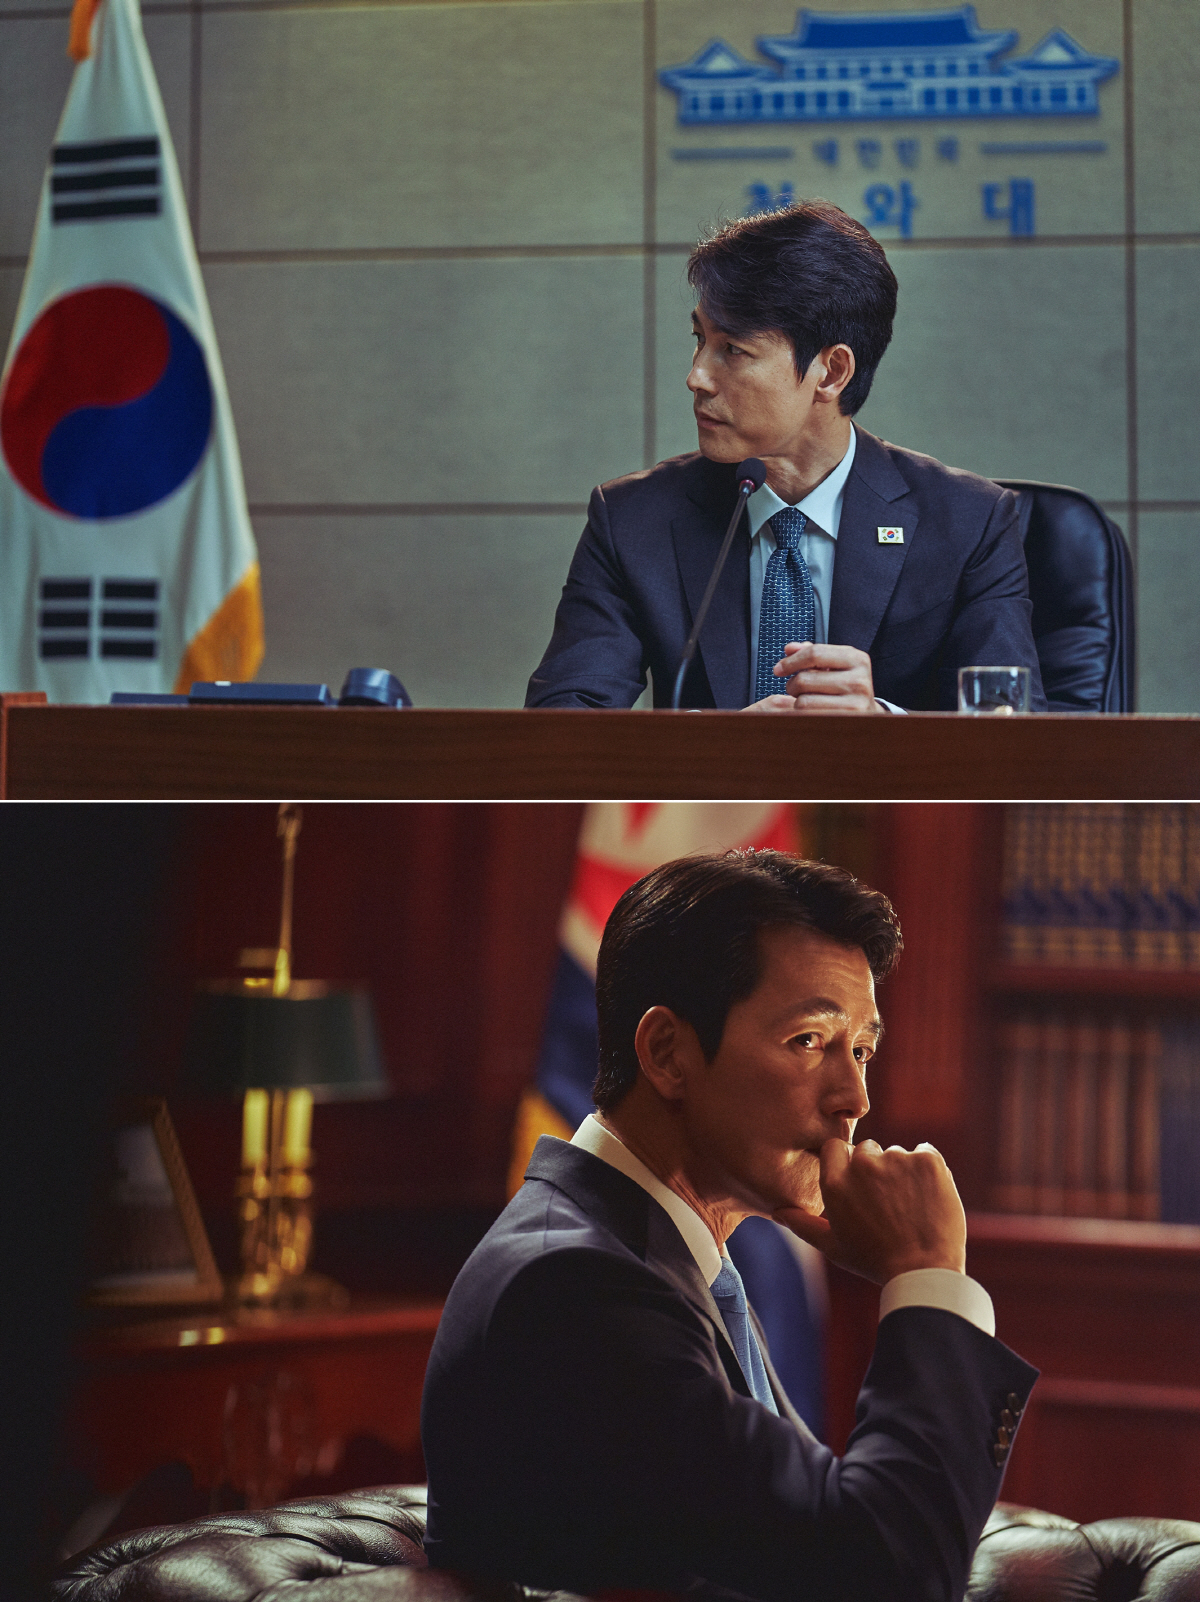 Political action film Steel Bee 2: Summit (hereinafter directed by Woo-seok Yang and produced by Studio Genius Friendship) released a character steel by Jung Woo-sung, who turned South Korea president.Starting with Bit, Easer in my head, Good guy, Bad guy, Strange guy, Watchers, Do not forget me, Asura, The King, Steel Rain, Witches, Watches who want to catch straw.Jung Woo-sung, who has been performing various activities that can not be explained in one modifier.If you show the North Choi Jeong Yawon filled with beliefs about your country through Steel Rain, you will transform into South Korea President to keep the peace of Korean Peninsula in the war Danger in Steel Rain 2.South Korea President Han Kyung-jae, who Jung Woo-sung has played, is a person who is worried about establishing peace in Korean Peninsula, which has become an island of the Cold War in a rapidly changing international situation.Among the hard-hit North and South American Summits, North Koreas coup is confined to North Korean nuclear submarines.In this work, Jung Woo-sung is the president who has the fate of South Korea on his shoulders, and tries to prevent an impending war, intervening between the sharply confrontational North Chairman (Yoo Yeon-Seok) and the U.S. President (Angus McFeifeiden) at times flexibly and sometimes with a firmness.Jung Woo-sungs three-dimensional act, which combines a cool reason as president and a human side as an ordinary father who listens to his wife and takes away his pocket money for his daughter, leads the center of the drama in a balanced way.Jung Woo-sung said, As president, I think I have been worried about the historical consciousness of looking at Korean Peninsula, compassion for our nation, love and responsibility.Especially, I tried to keep my own center, and I was careful about the psychological description among the North American leaders. Director Woo-seok Yang said, We usually think of the president as a distant being, a national institution.I hope that the audience will be able to feel the president as a person, not an institution, and our expression when we look at the inter-Korean issue through the Acting of Jung Woo-sung Steel Rain 2: Summit is a work that depicts the situation of Danger just before the war that takes place after the three leaders were kidnapped by the Norths nuclear submarine during the North-South US Summit.Jung Woo-sung Kwak Do-won Yoo Yeon-seok Angus Mac Wang Feifei and others, and Woo-seok Yang, director of Steel Rain and Attorney, caught megaphone.It is scheduled to open this summer.